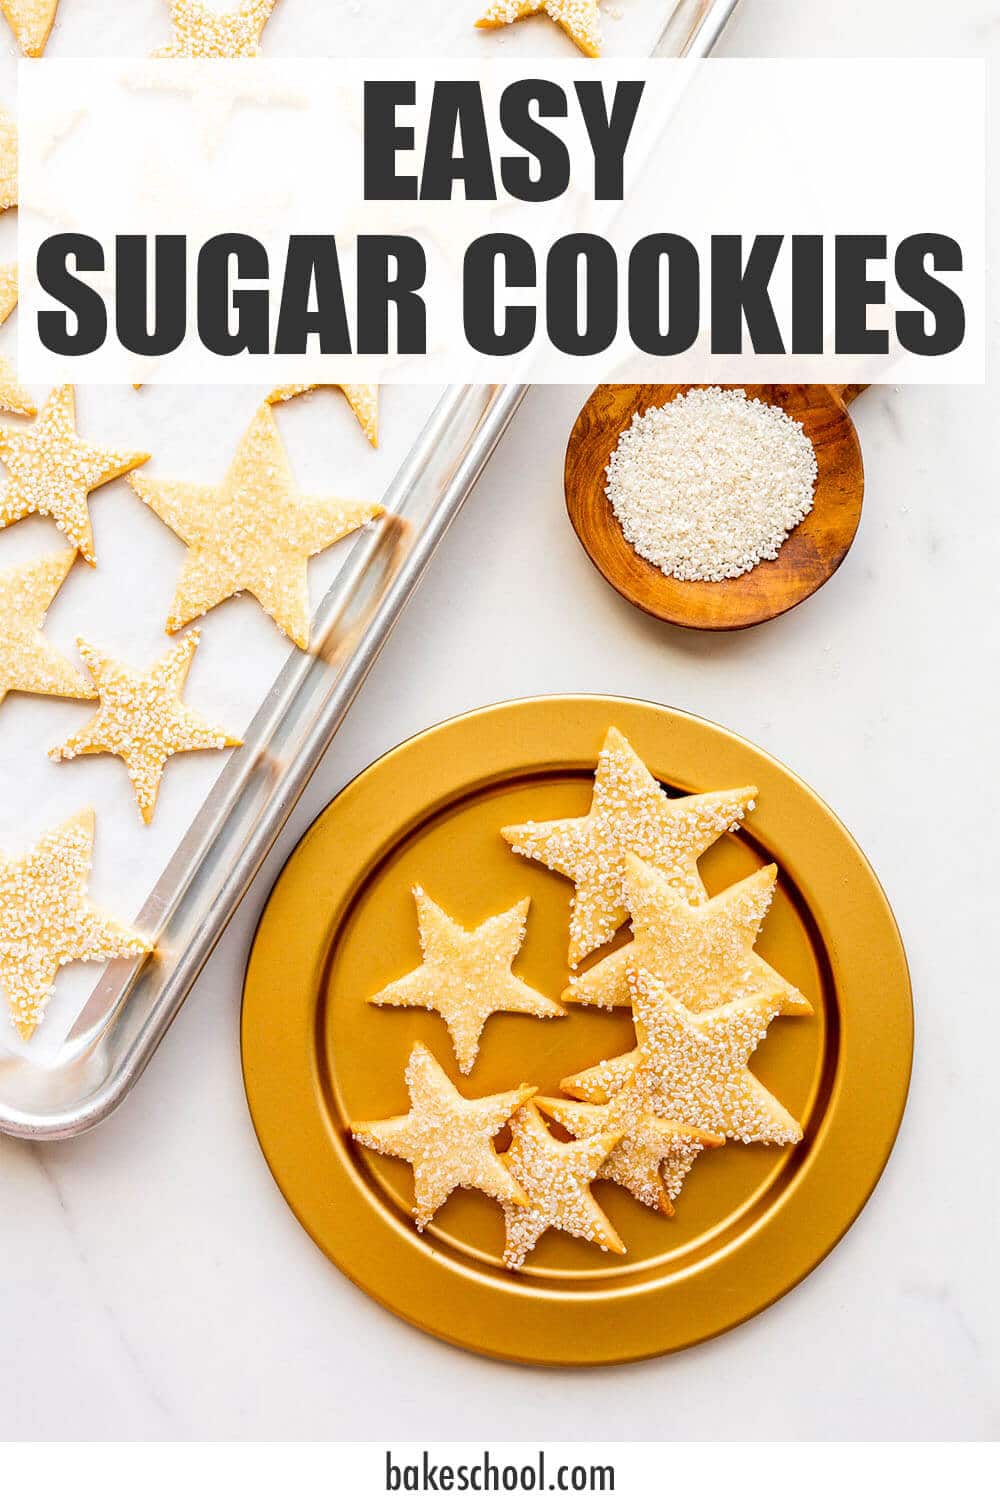 Cut-out sugar cookies shaped like stars and coated in sparkly sanding sugar served on a gold plate.